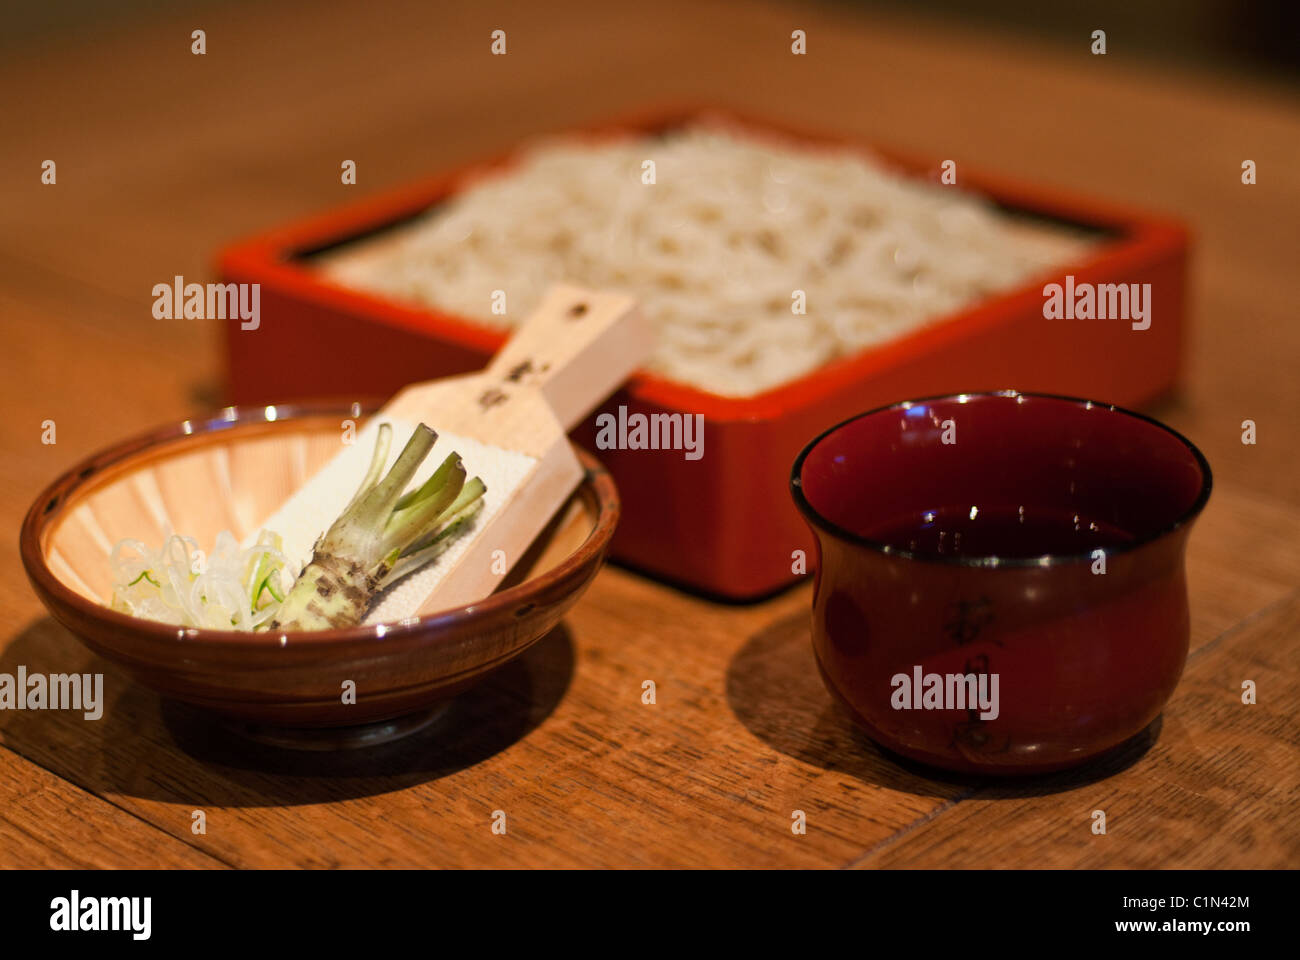 Zaru soba noodles (cool buckwheat noodles) with fresh wasabi root and dipping sauce. Stock Photo